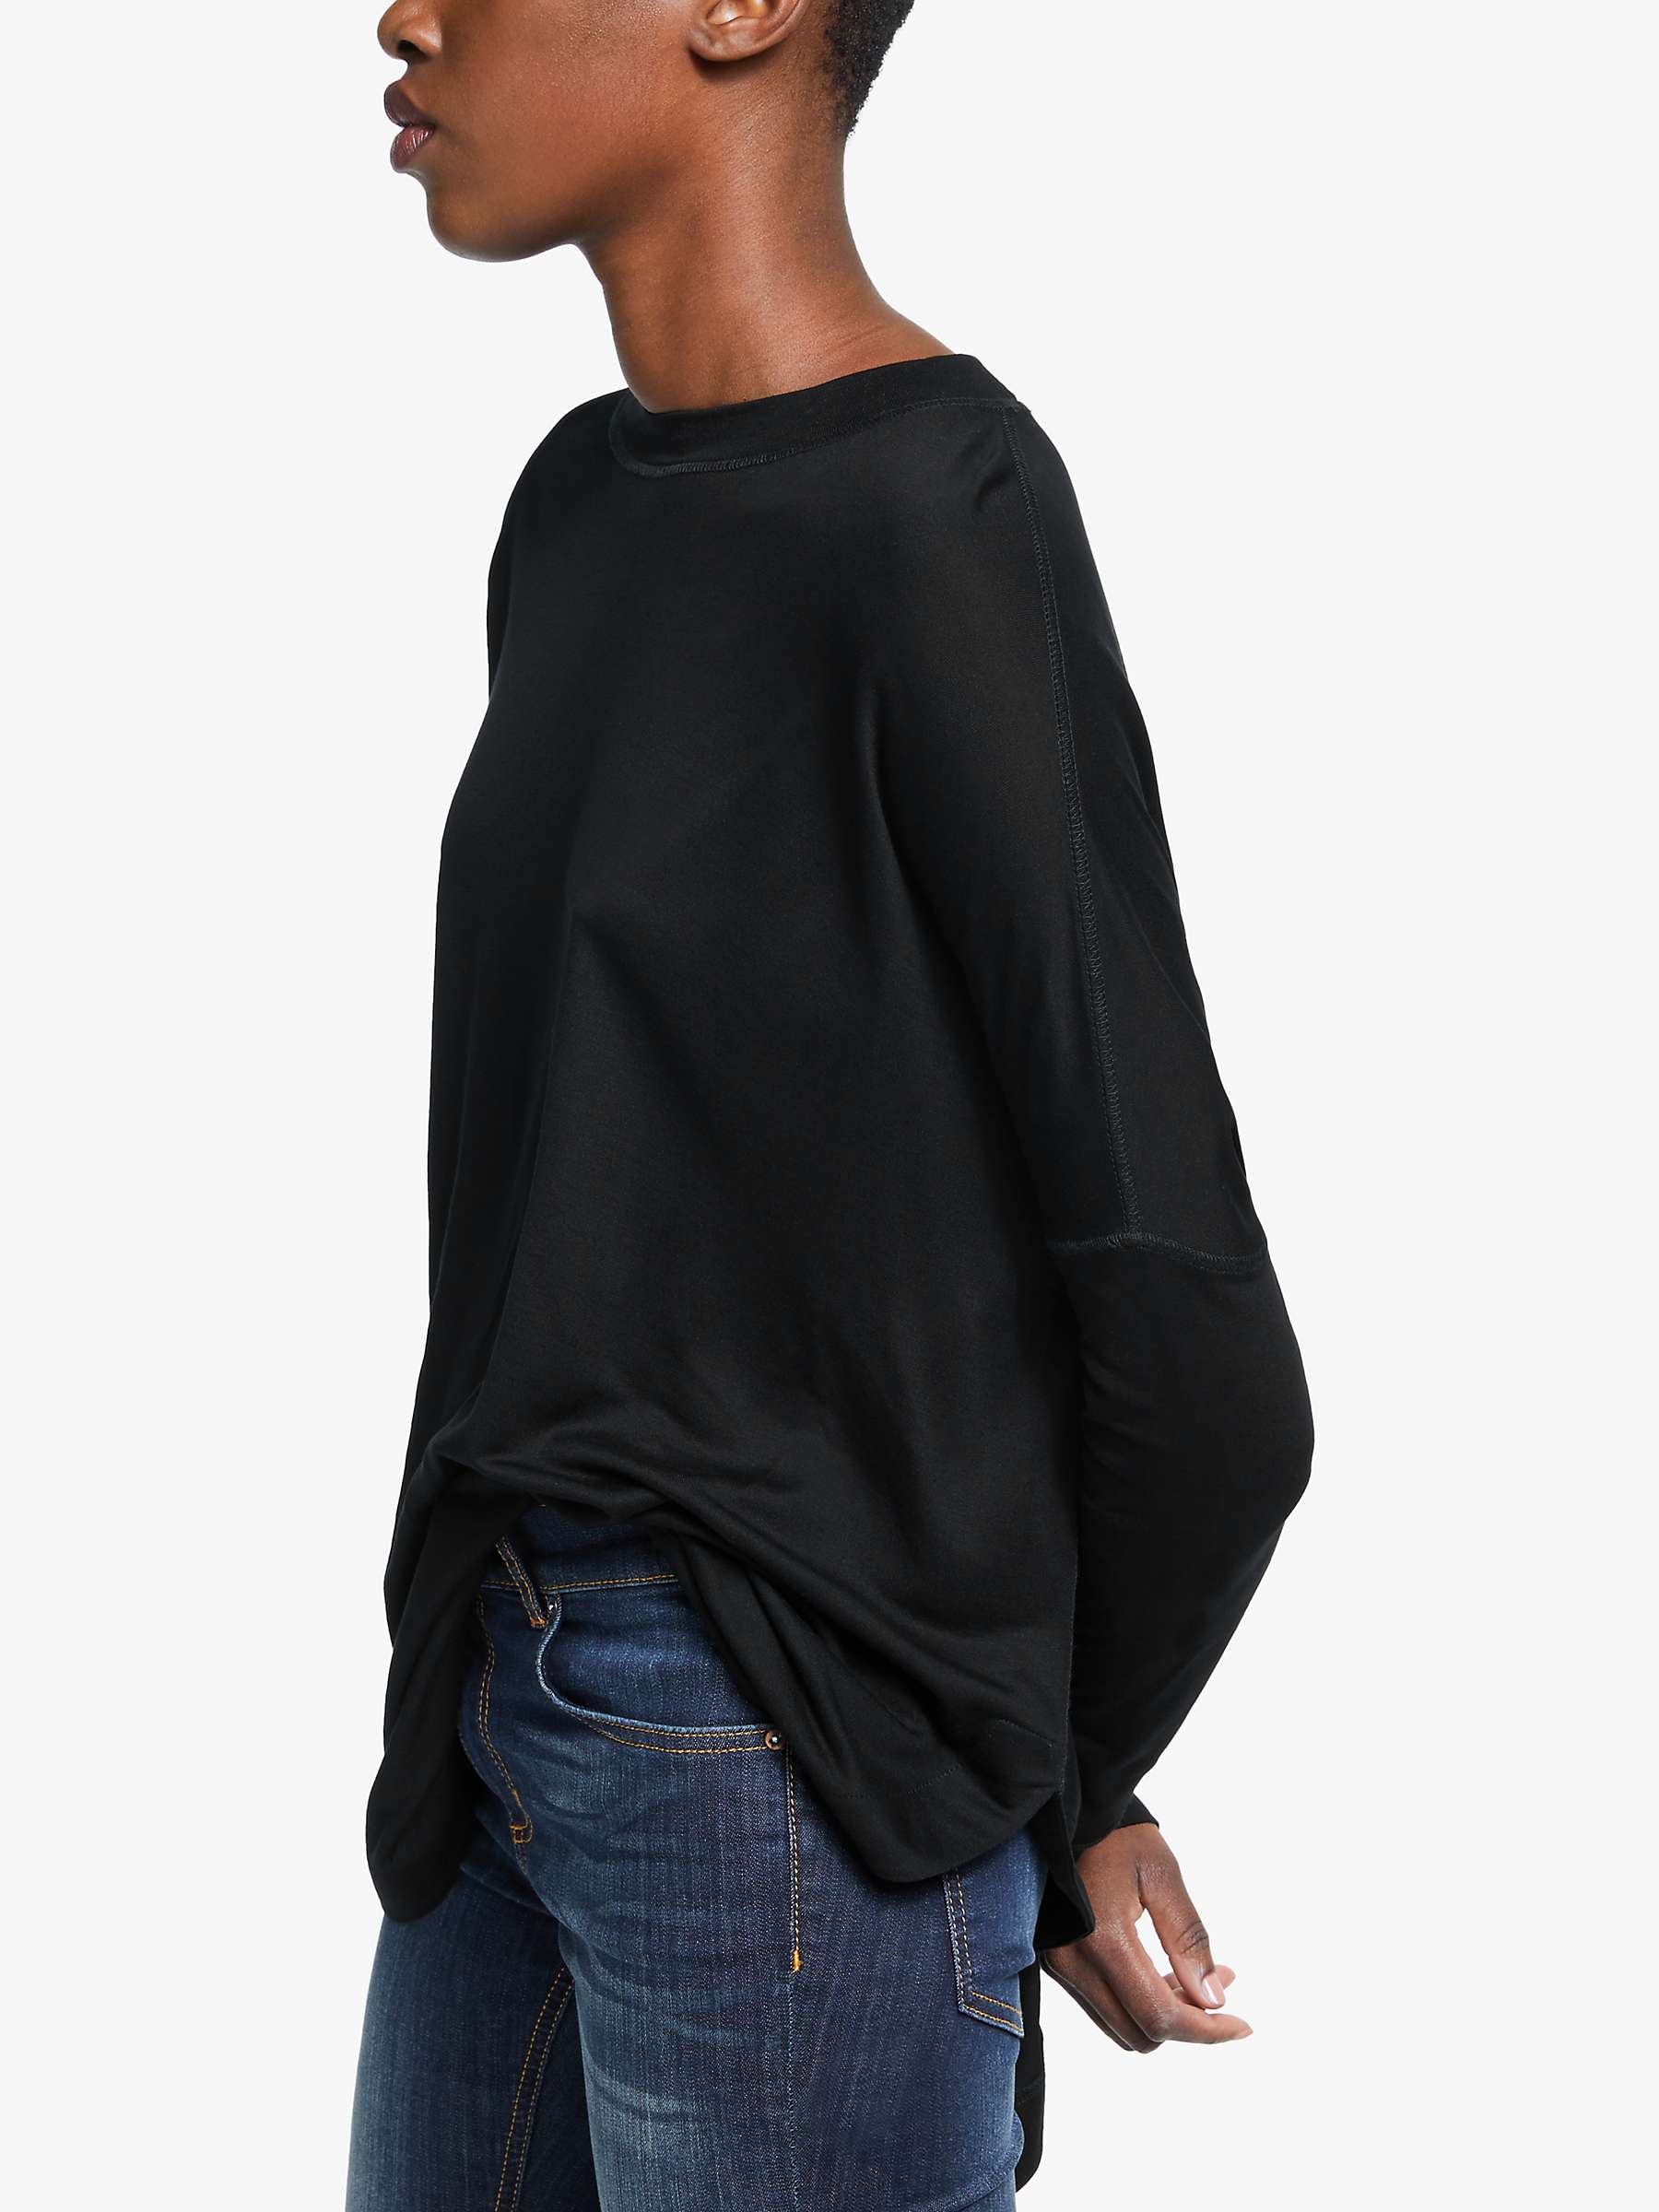 Buy AND/OR Orla Long Sleeve Jersey Top, Black Online at johnlewis.com